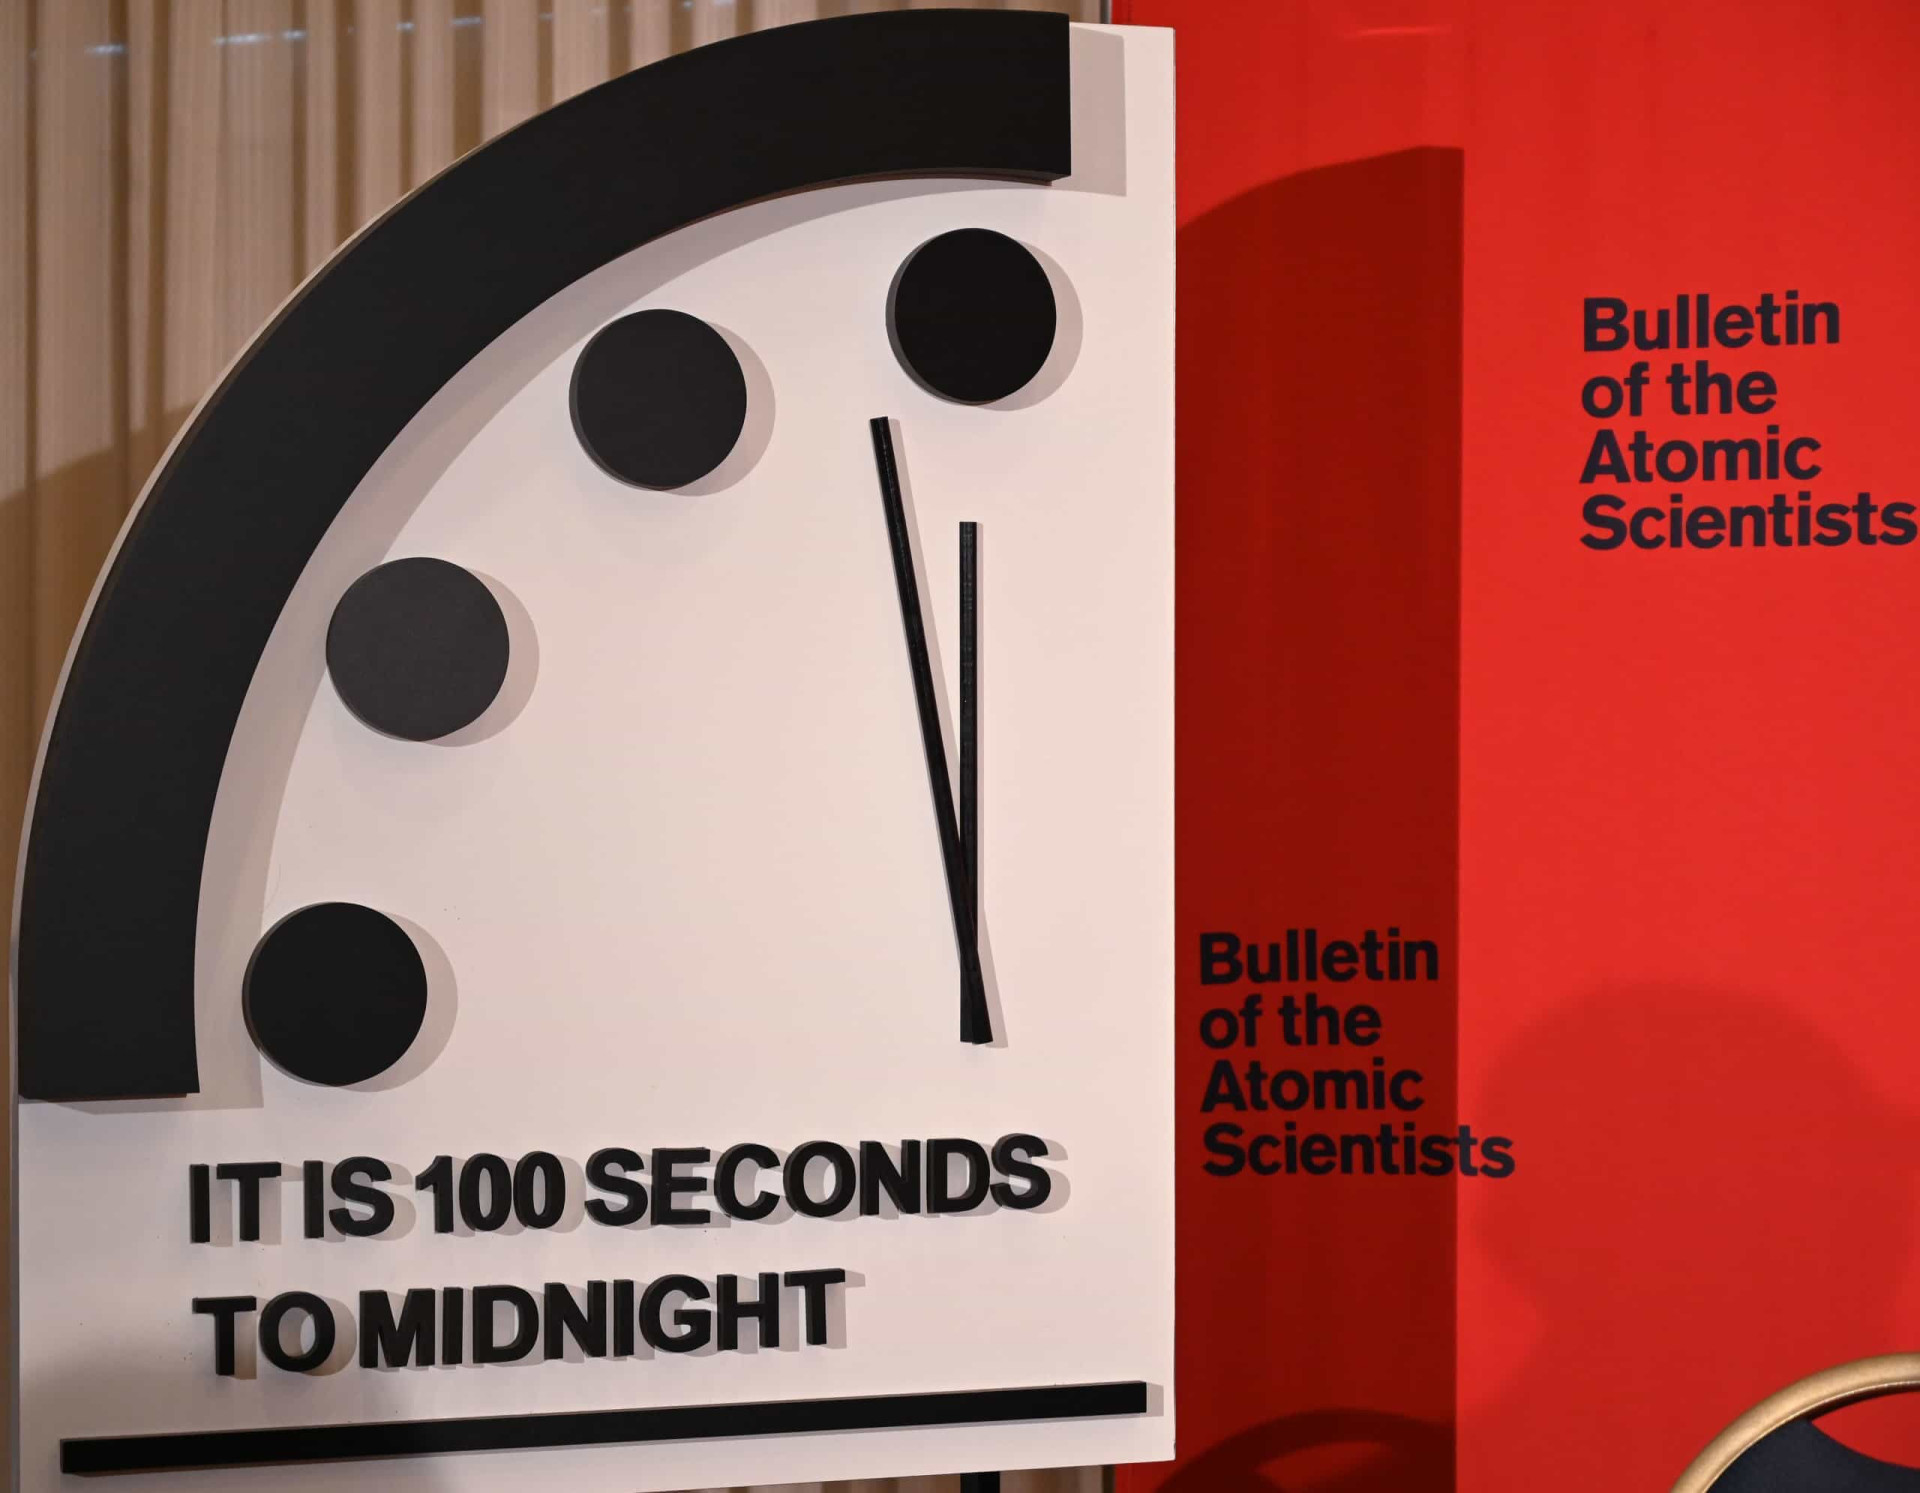 <p>In 2020, the unit of time was announced in seconds (100) to emphasize "the most dangerous situation that humanity has ever faced," according to the Bulletin of the Atomic Scientists.</p><p><a href="https://www.msn.com/en-us/community/channel/vid-7xx8mnucu55yw63we9va2gwr7uihbxwc68fxqp25x6tg4ftibpra?cvid=94631541bc0f4f89bfd59158d696ad7e">Follow us and access great exclusive content every day</a></p>